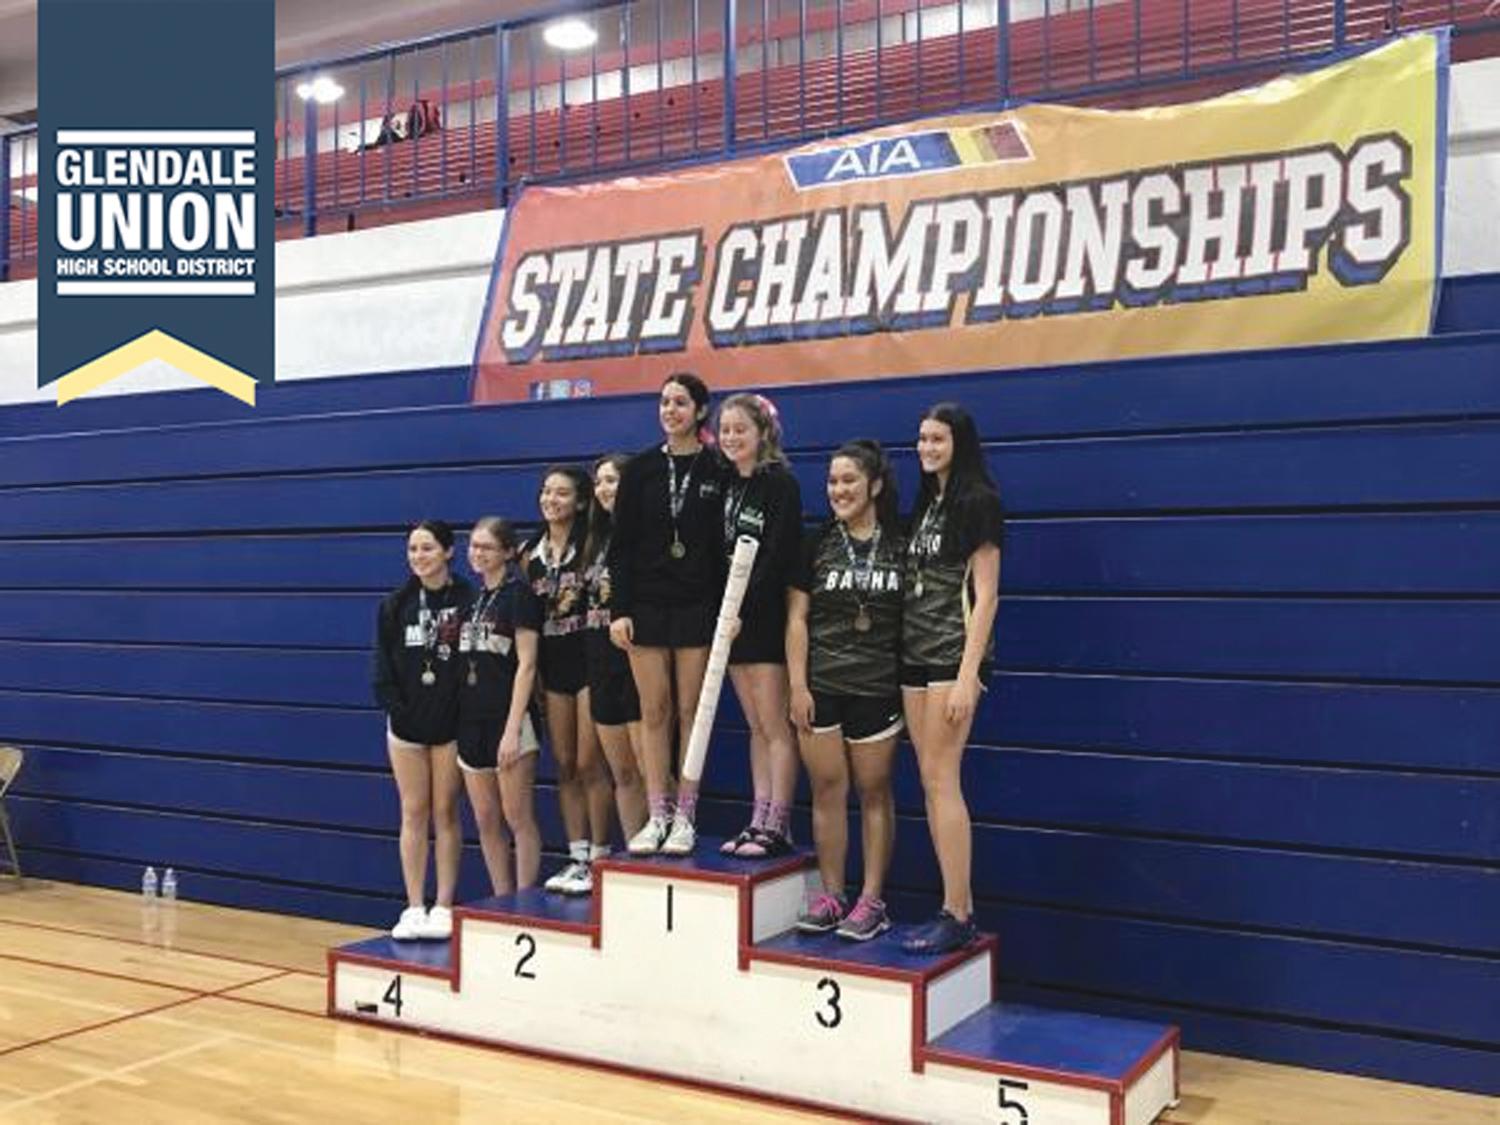 The badminton doubles team at Sunnyslope High School recently won the D1 Doubles State Championship title (photo courtesy of Glendale Union High School District).